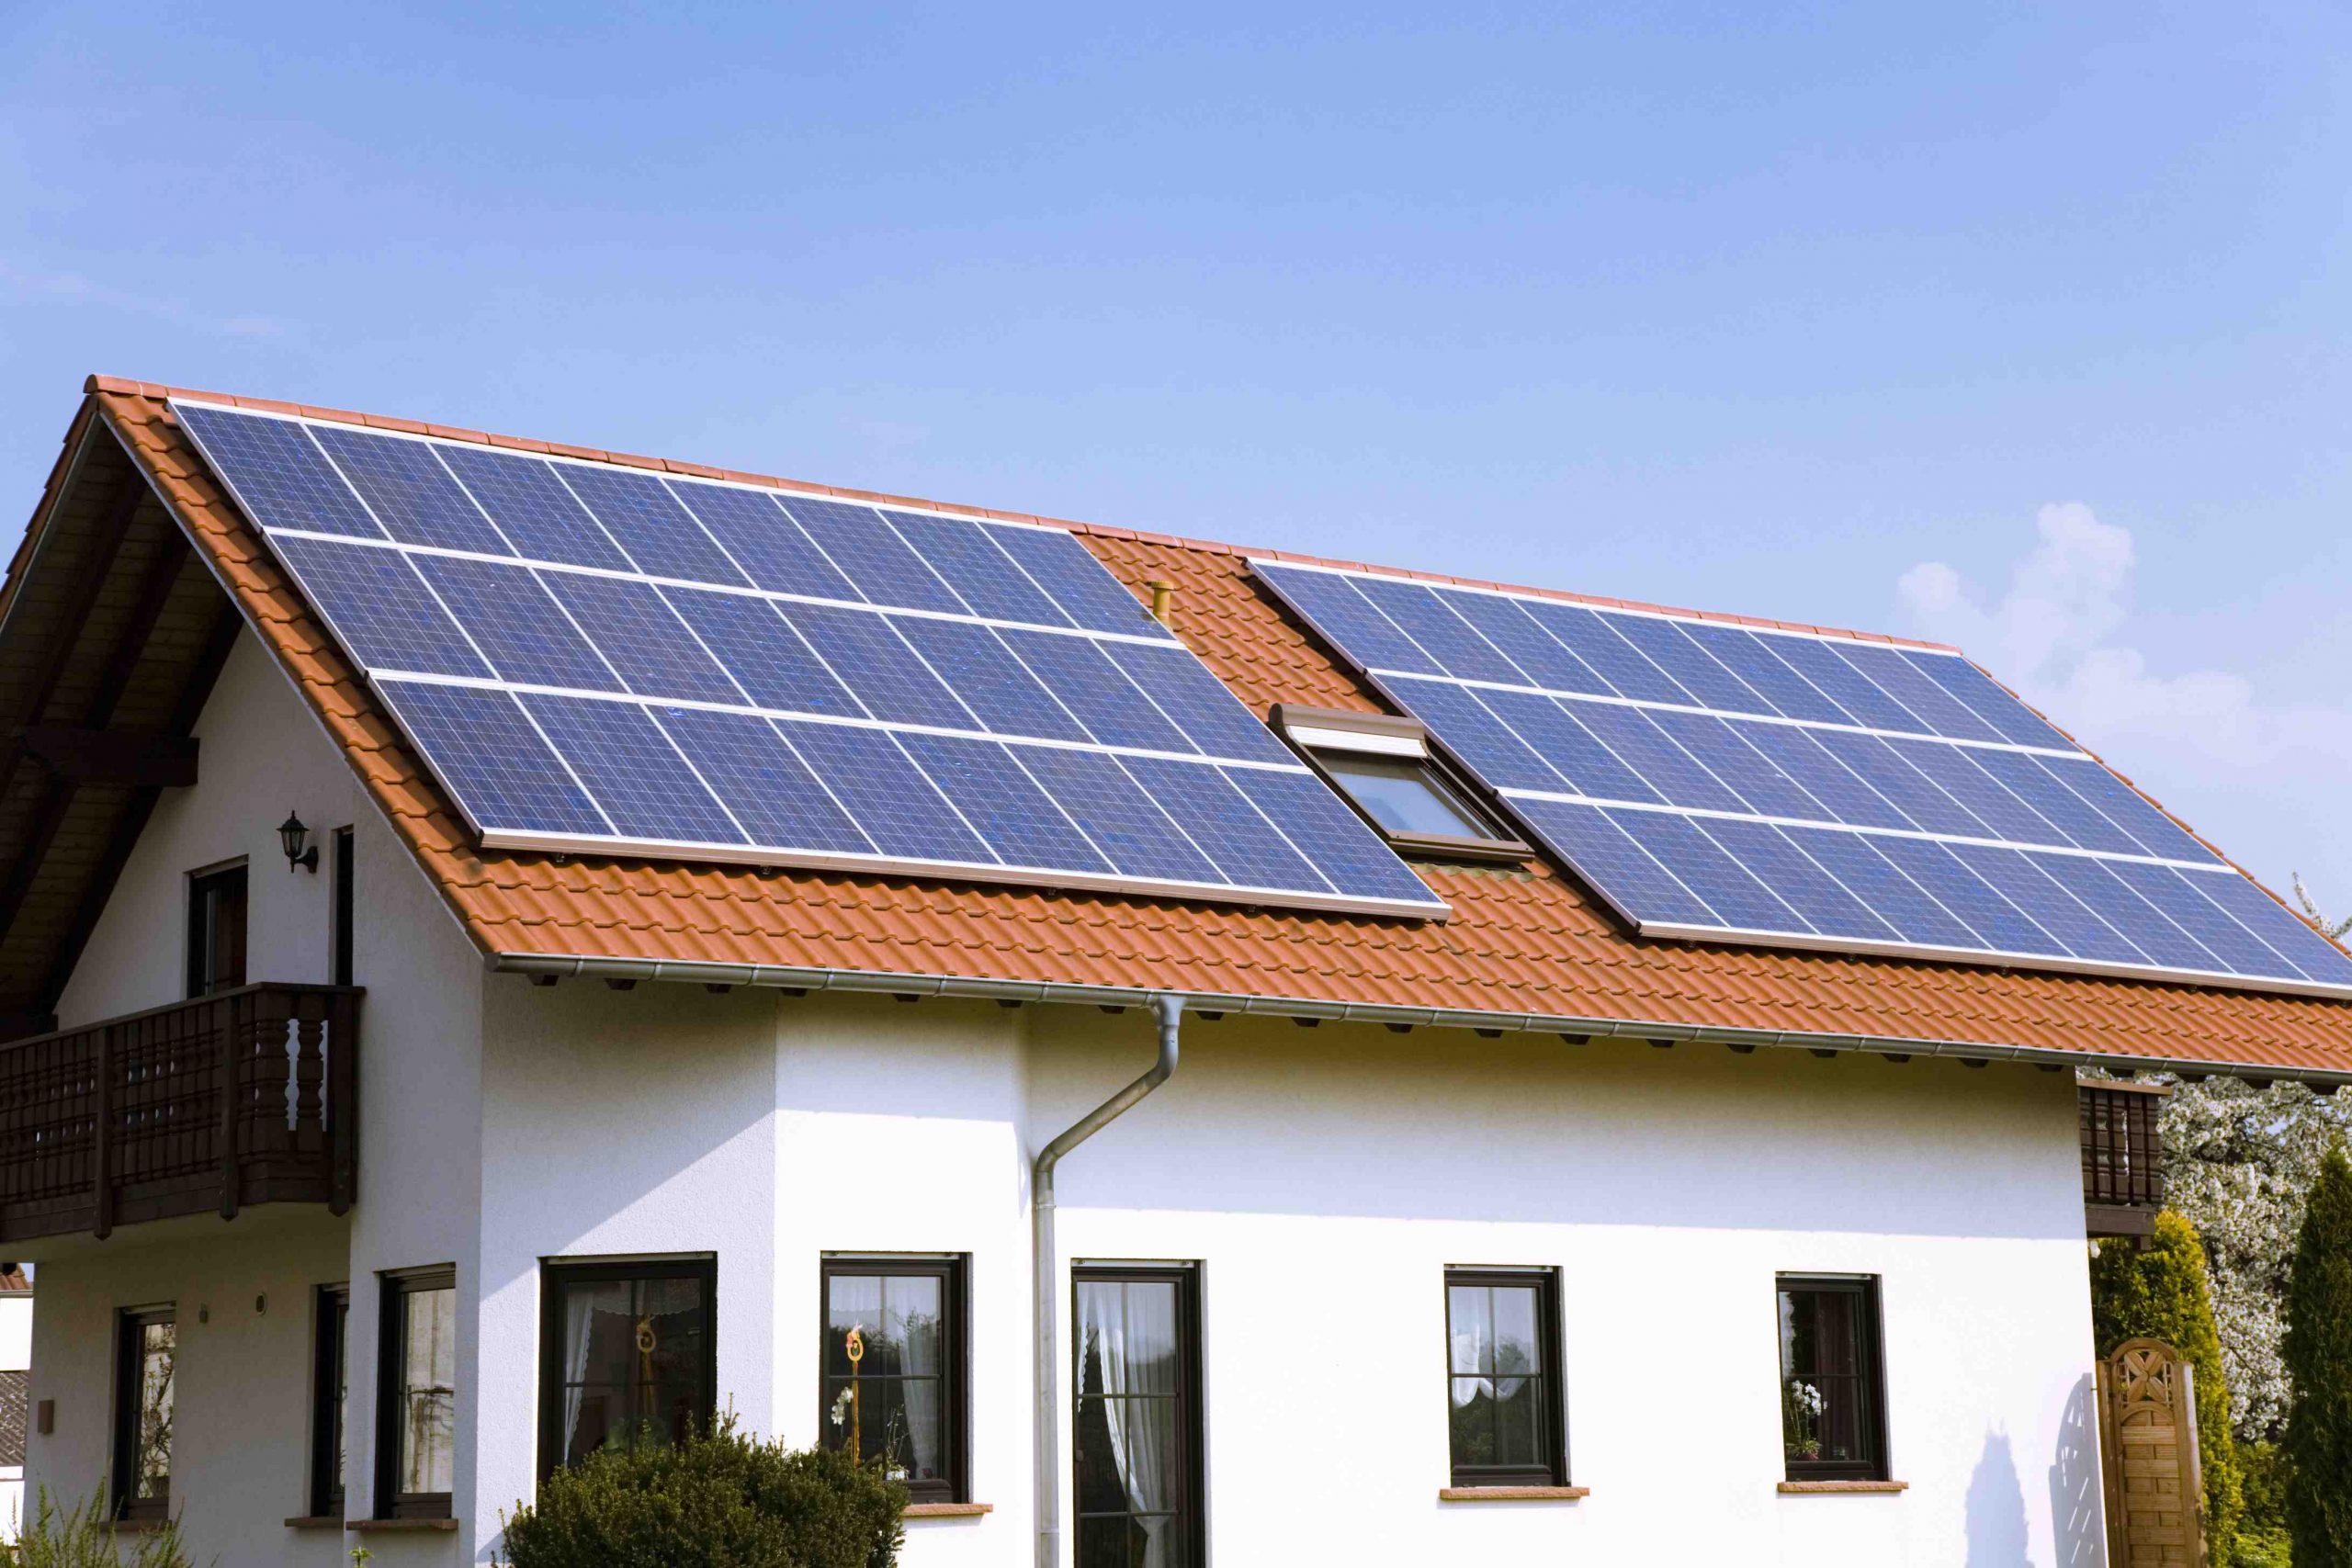 How many solar panels are needed to power a home?